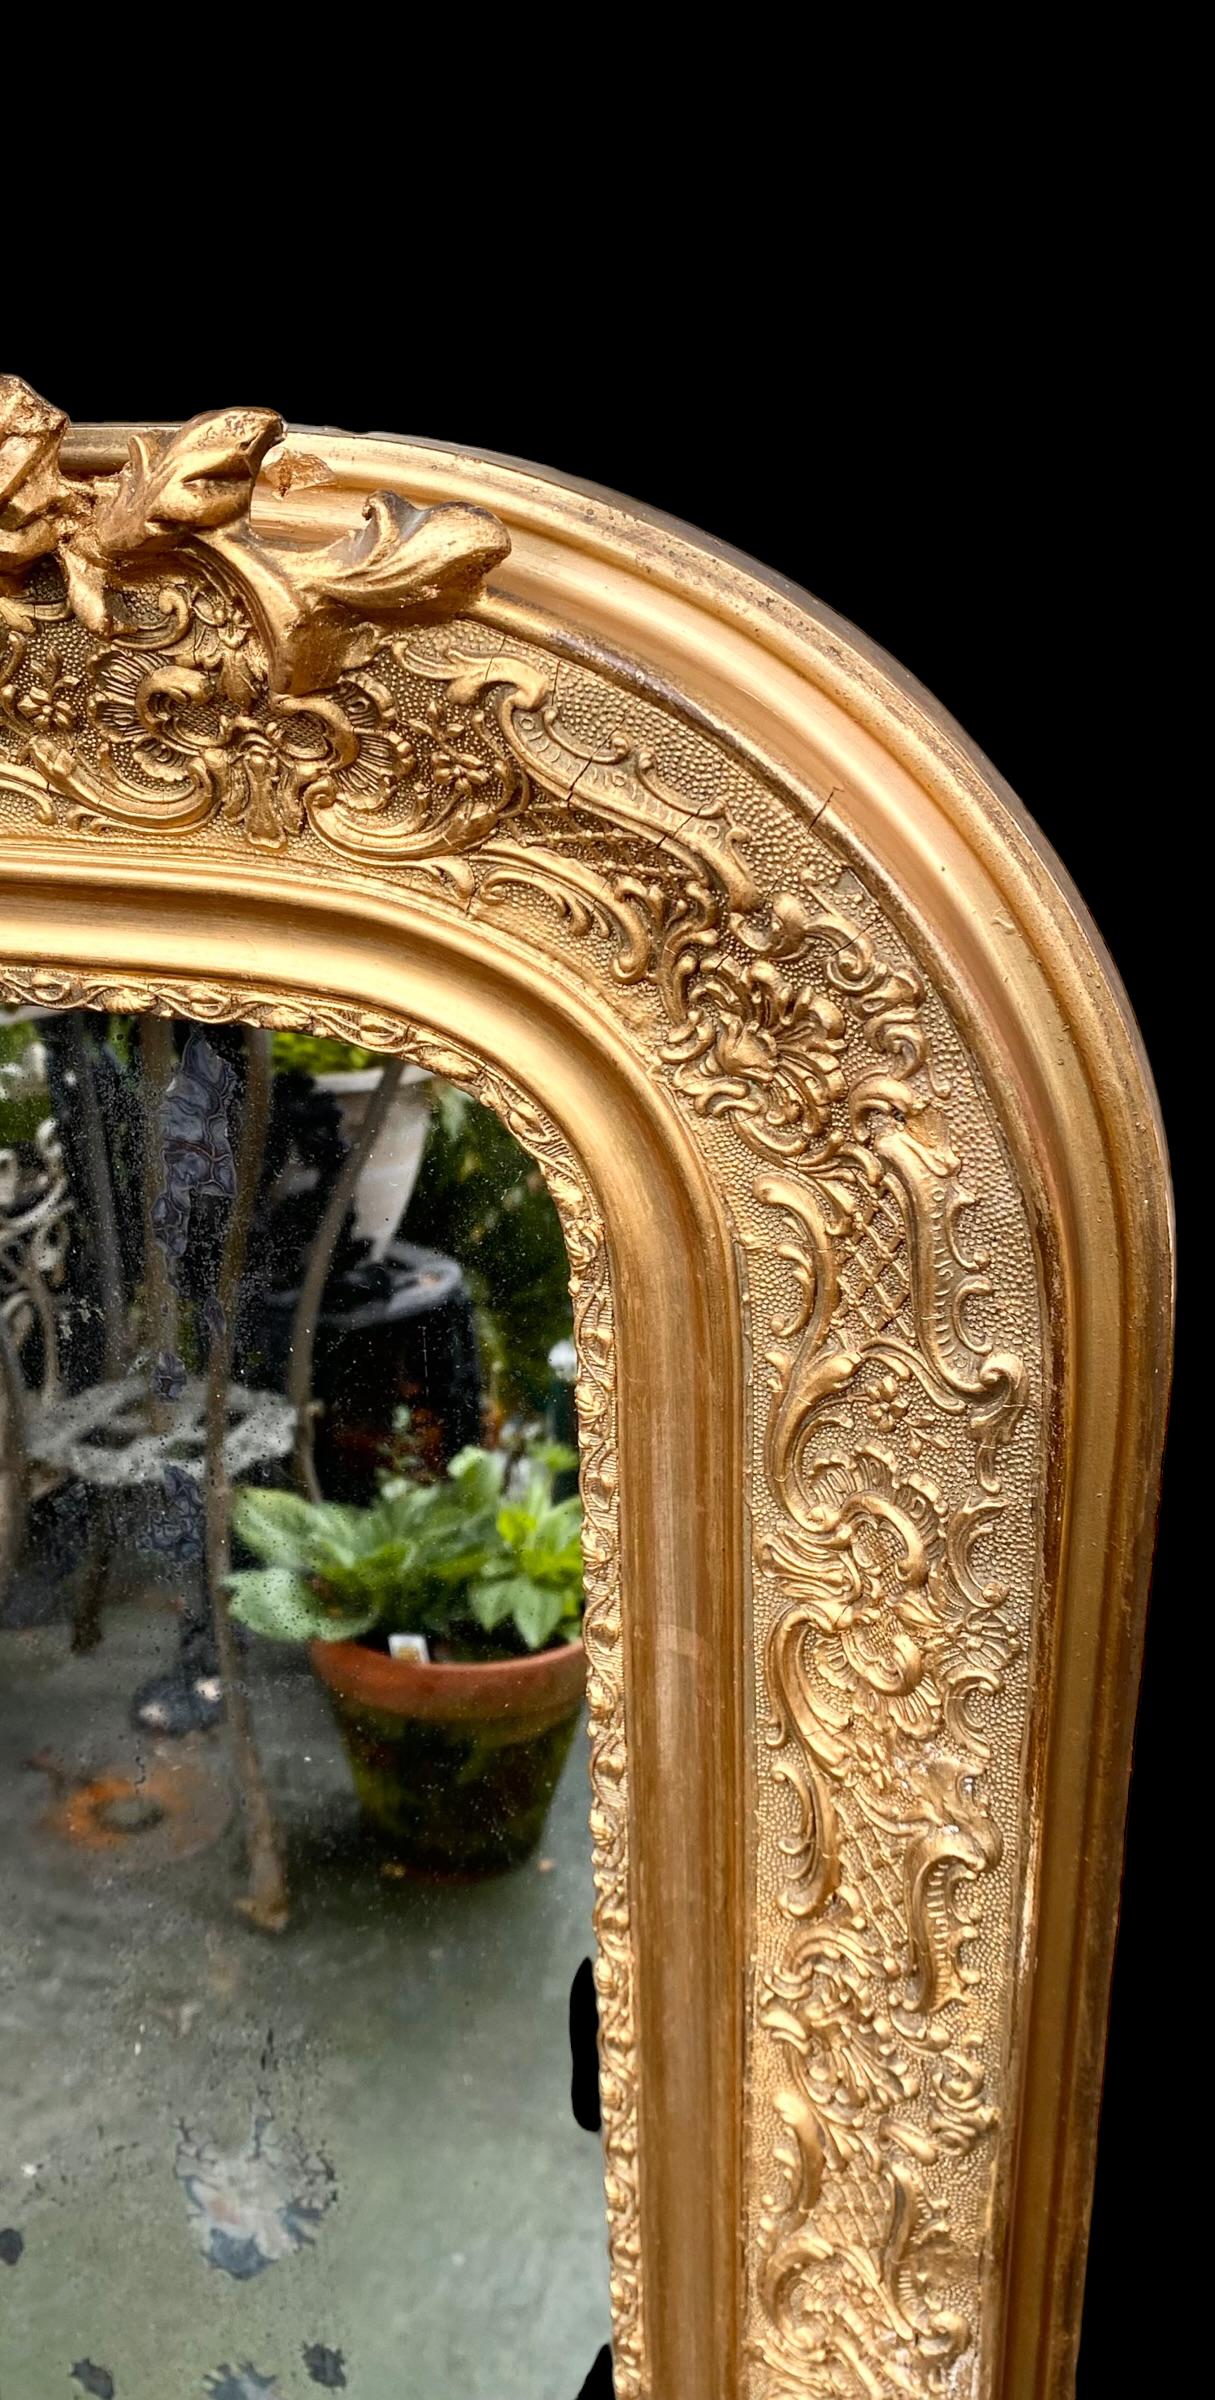 French Louis Philippe Gilt and Gesso Overmantel
Mirror, 19th century, with a pierced scroll and relief floral crest above a wide rounded corner frame with relief floral and scroll decoration around an arched top mirror plate. 

Antique French